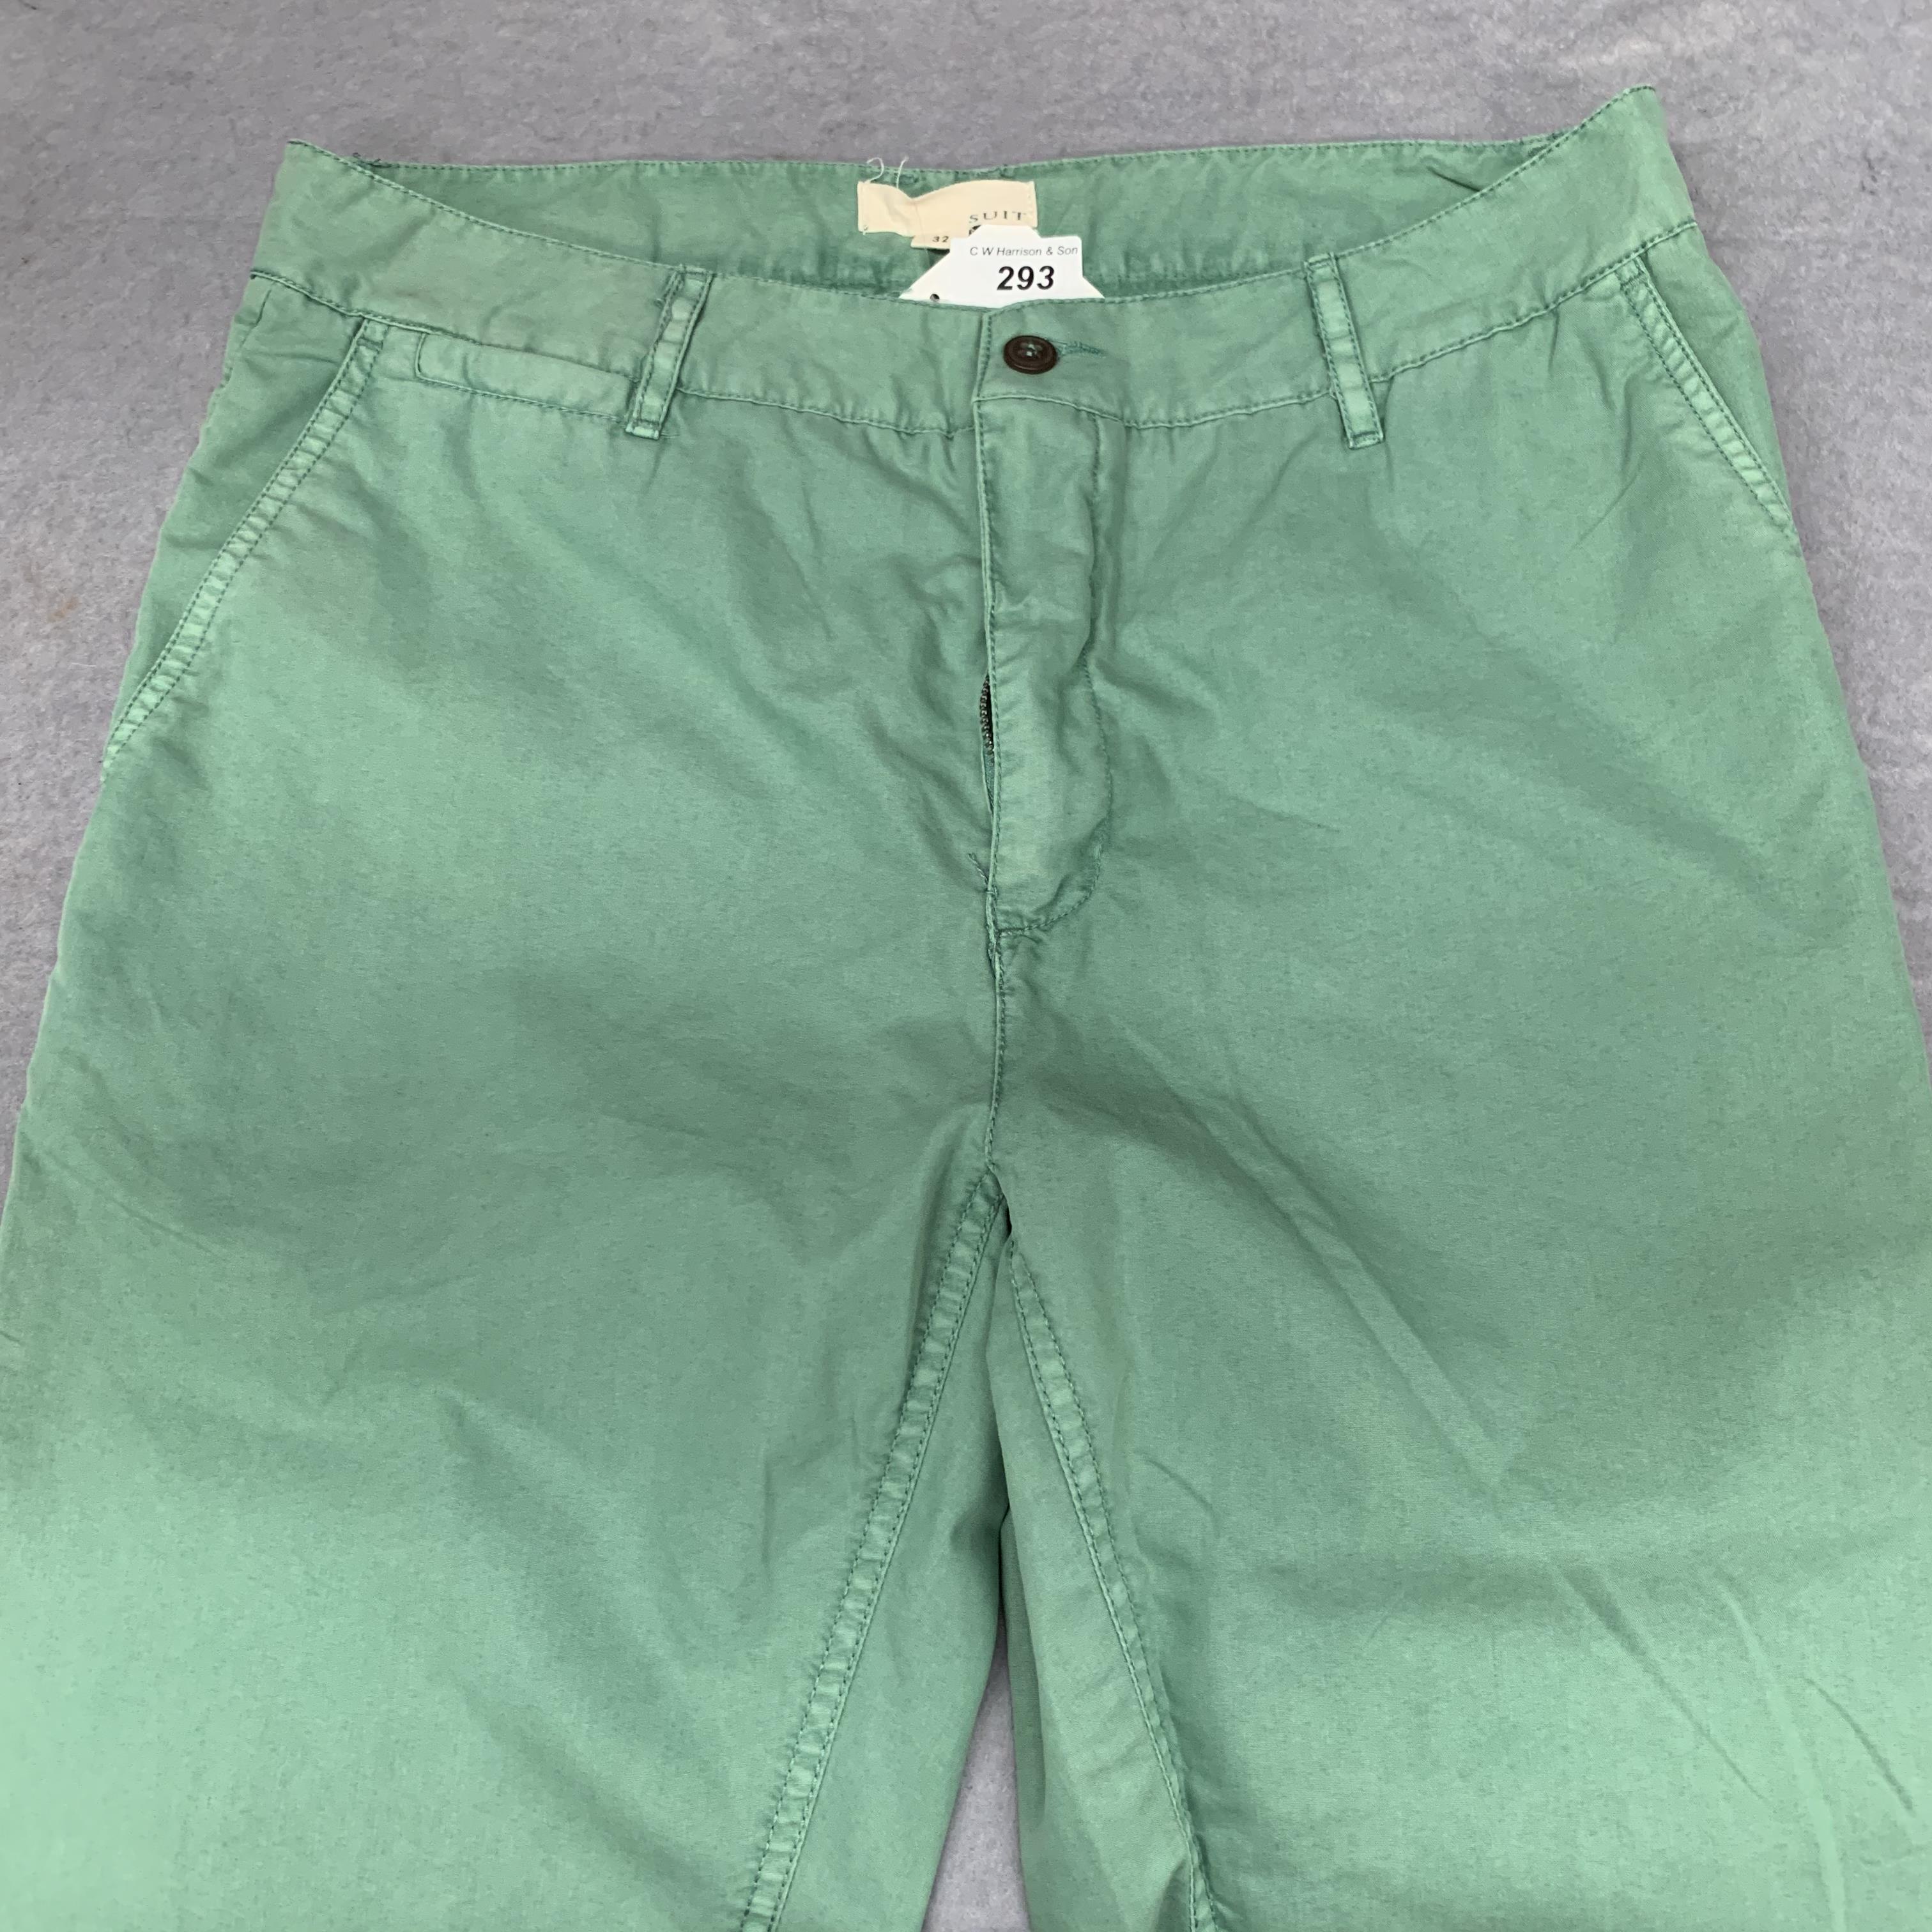 A pair of Suit men's trousers, green, size 32W,